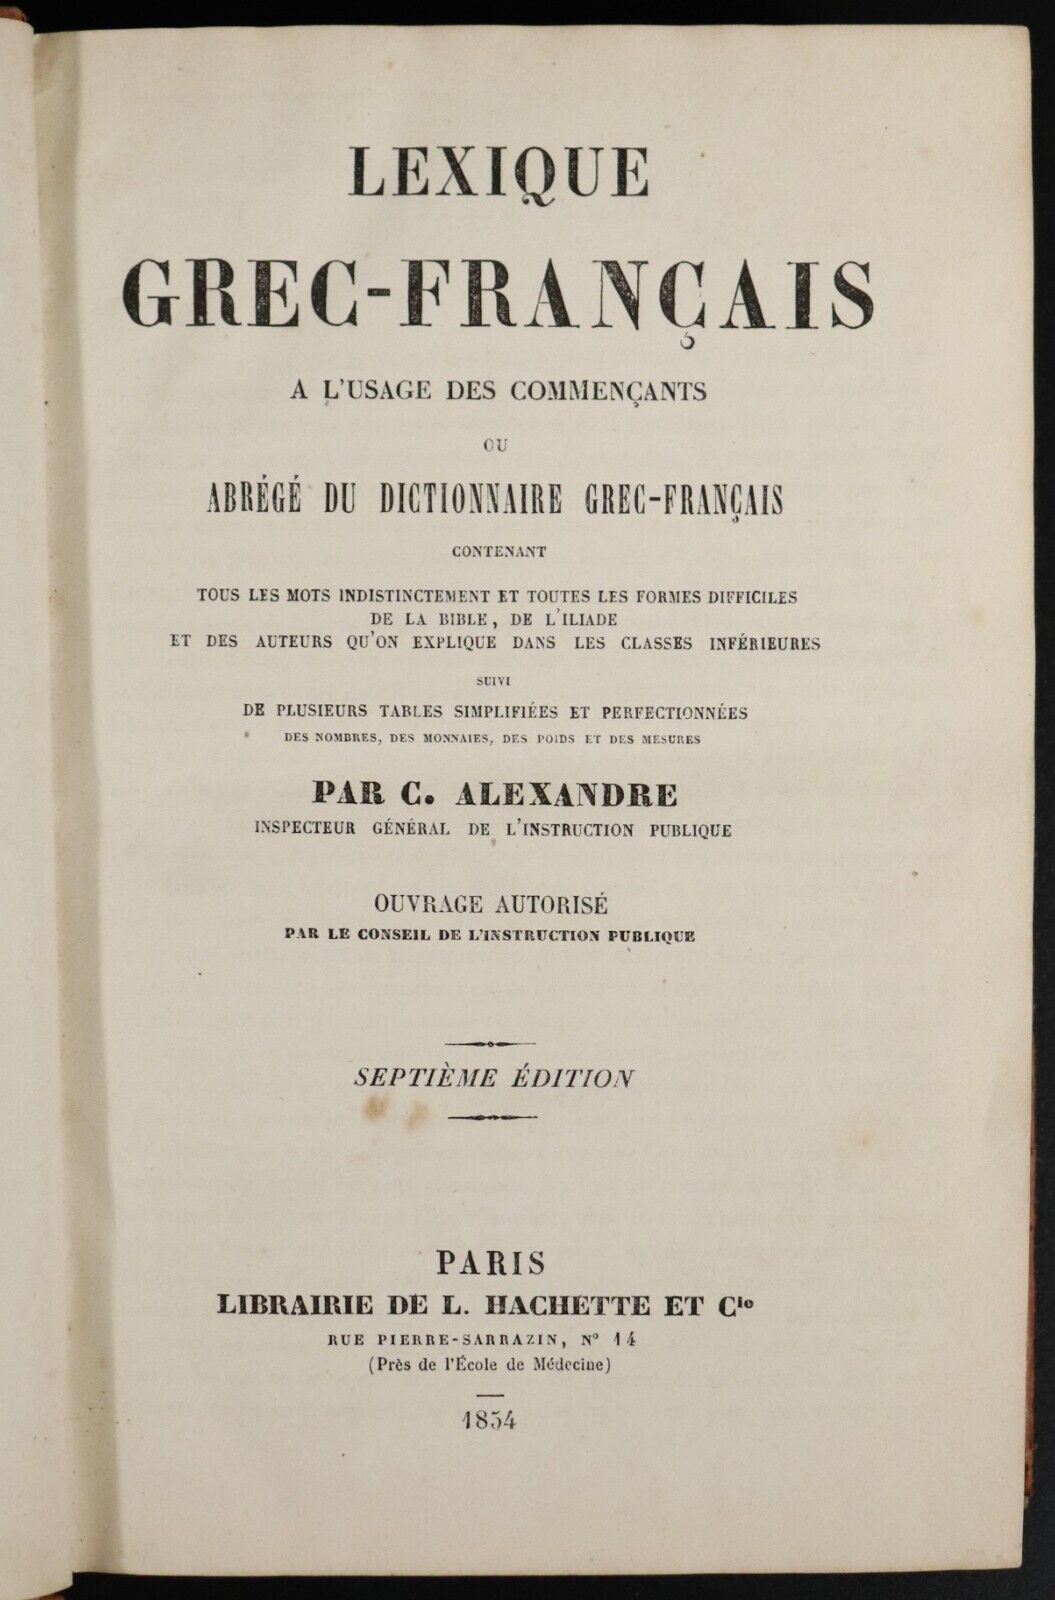 1854 Lexique Grec Francais by C Alexandre Antiquarian French Reference Book - 0